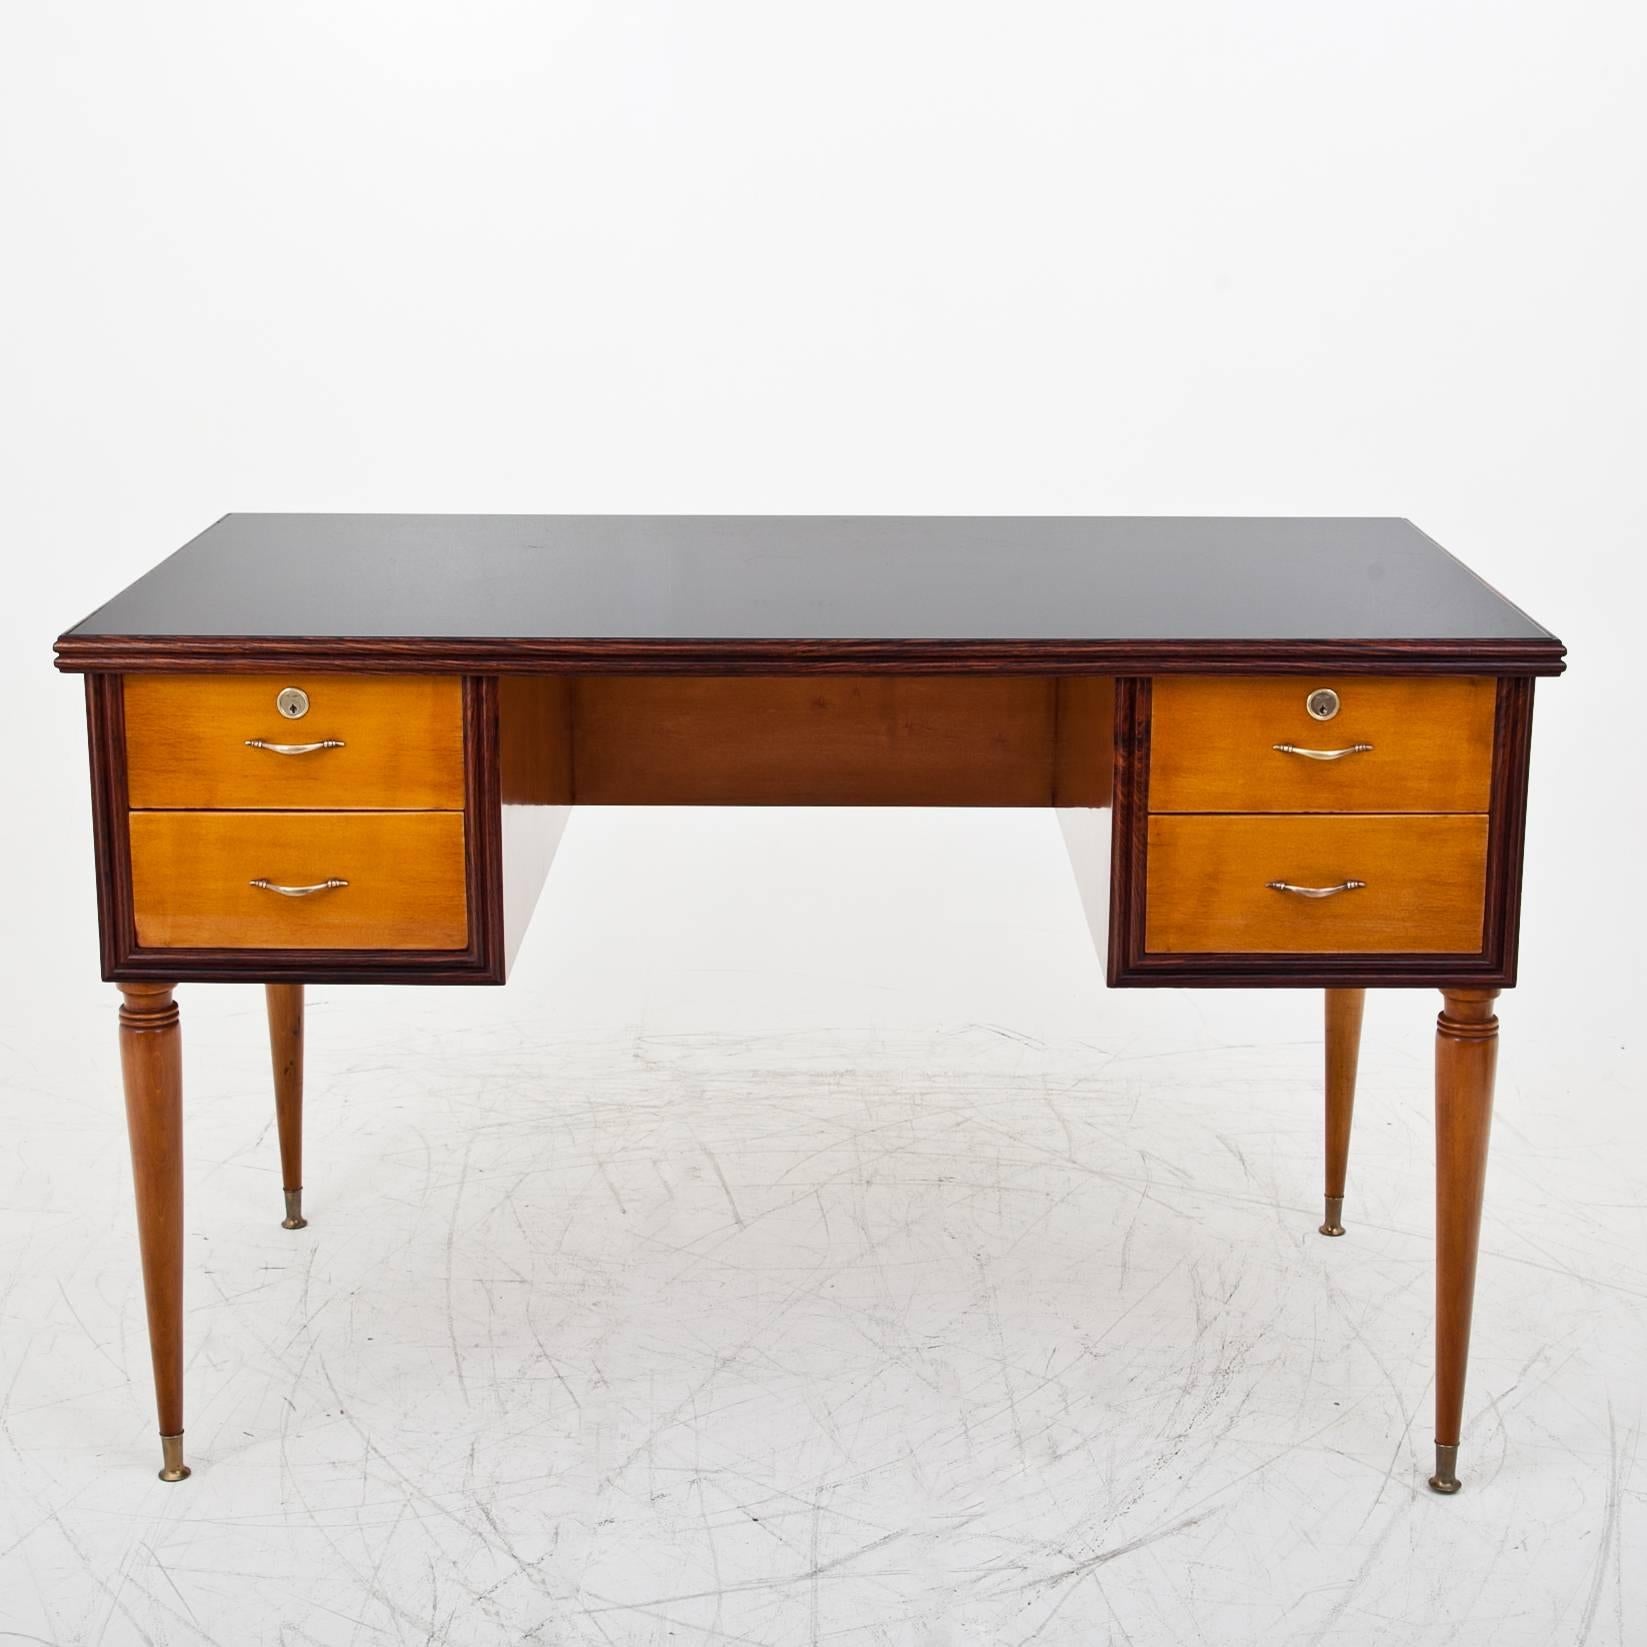 Italian desk, standing on conical legs, with four drawers and a stained glass top. The writing surface and the drawers are framed by a darker colored wooden edge. The table is designed for an all-round view and in a professionally restored condition.